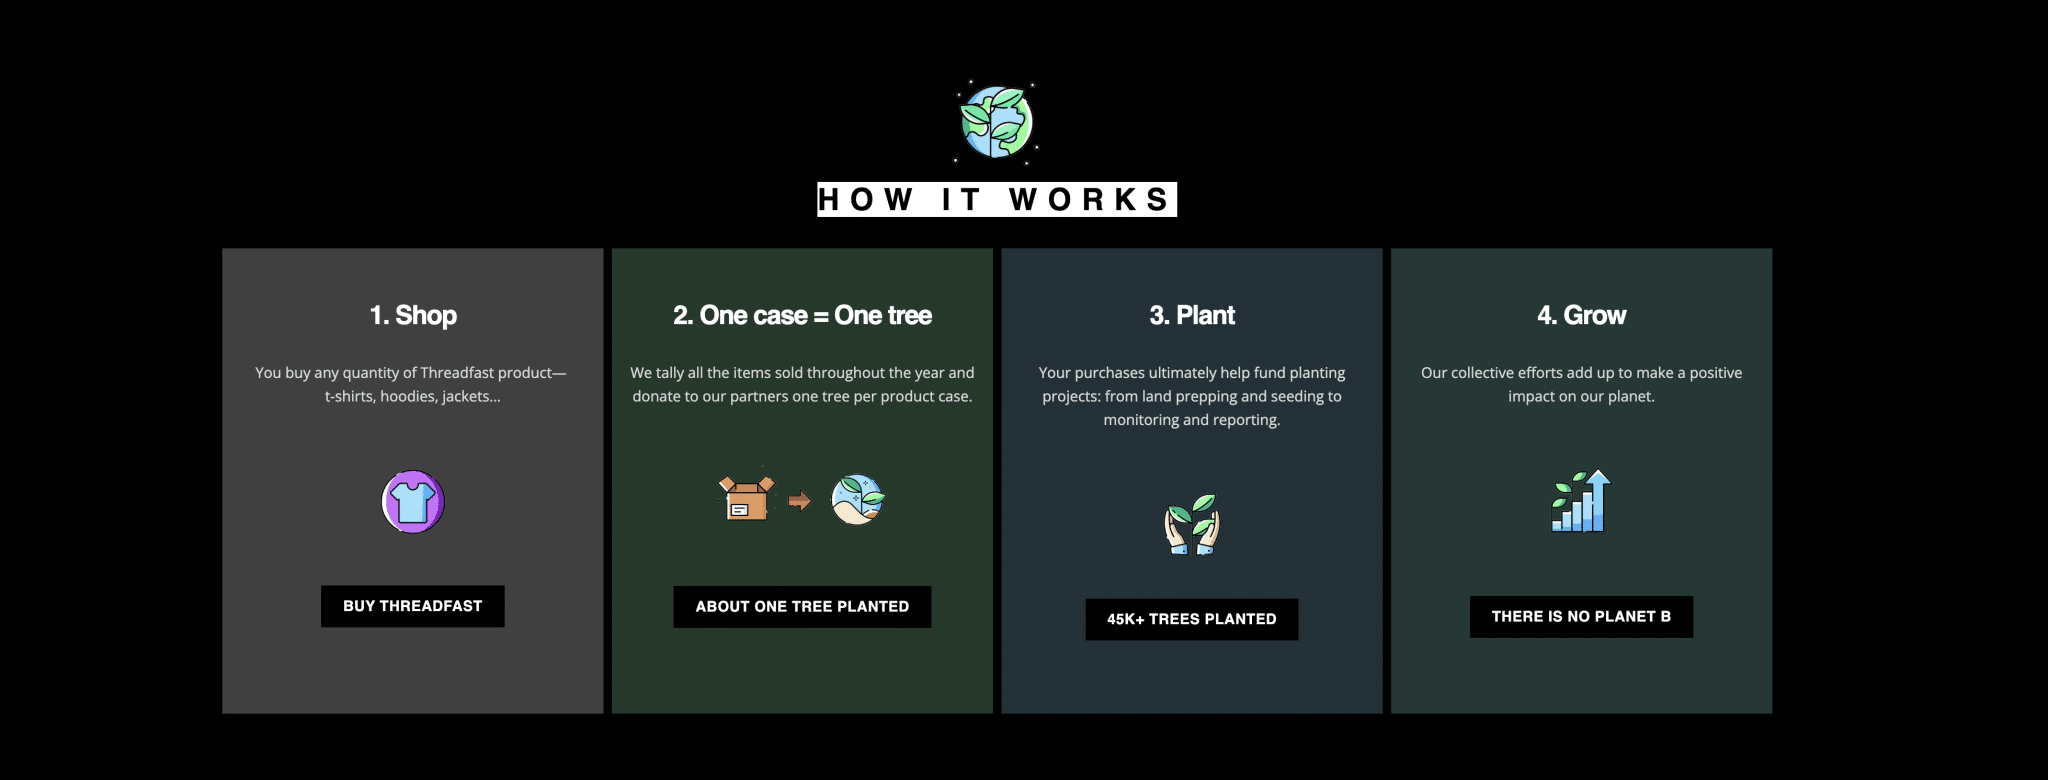 Diagram showing environmental initiative to plant one tree for every case of garments purchased.